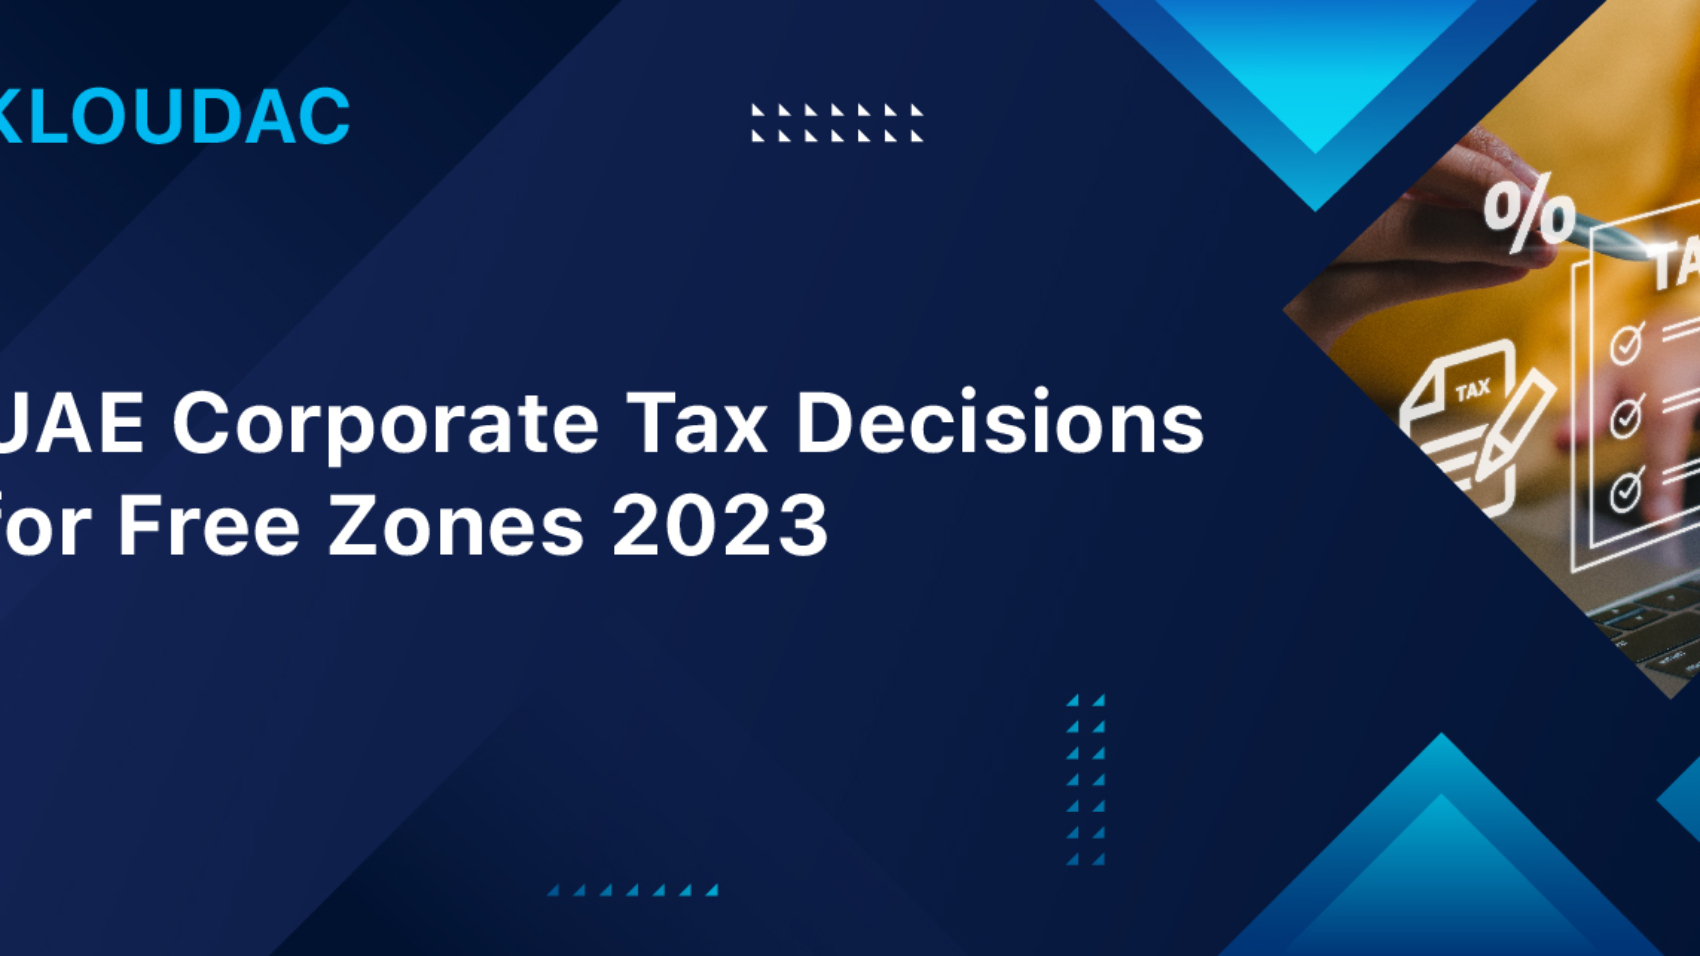 UAE Corporate Tax Decisions for Free Zones 2023